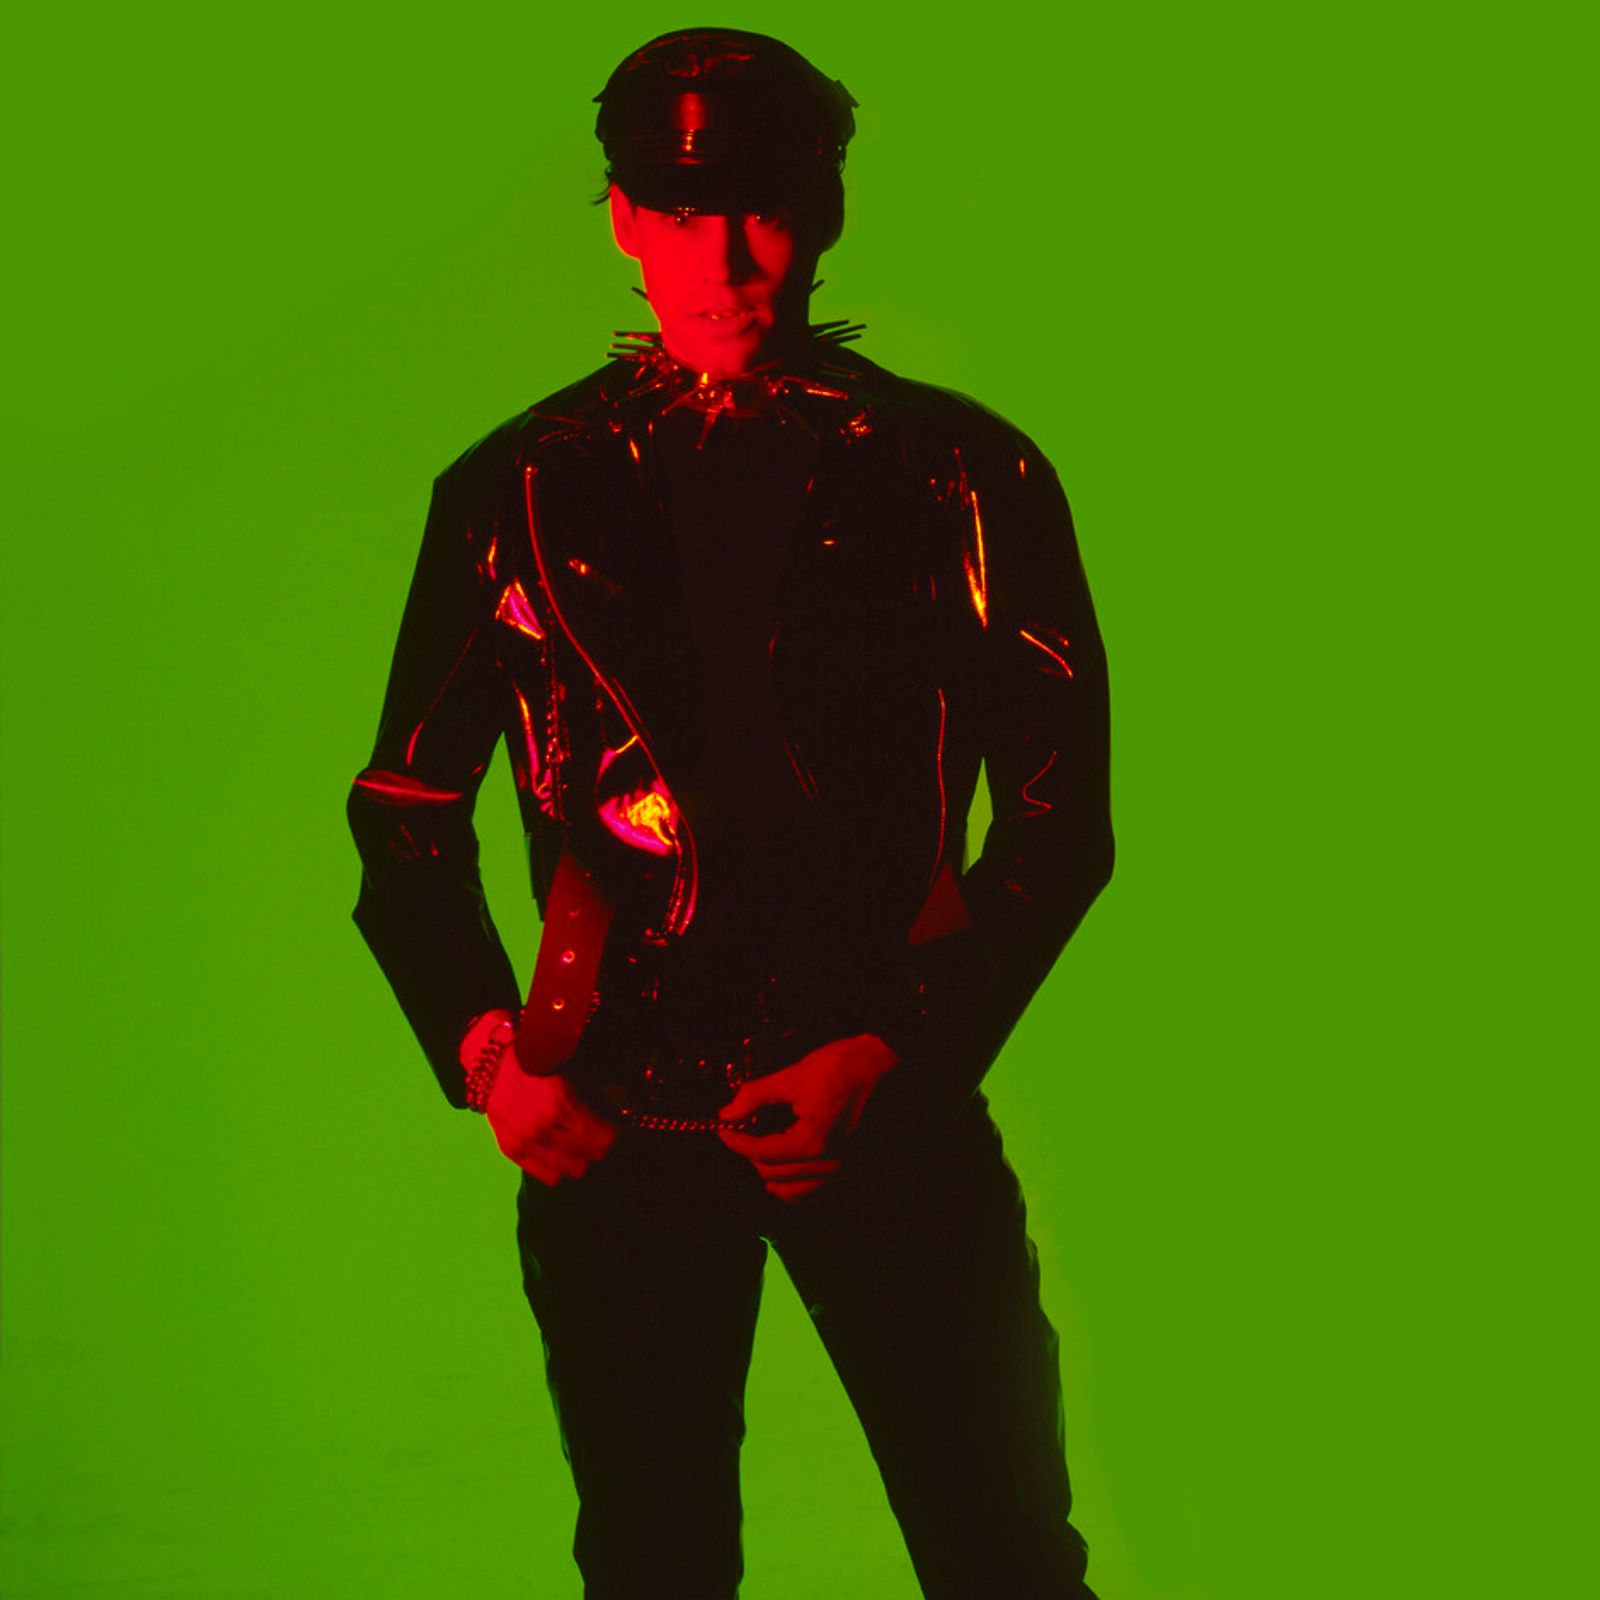 © Steven Edson - Young man in black vinyl outfit against rich green background